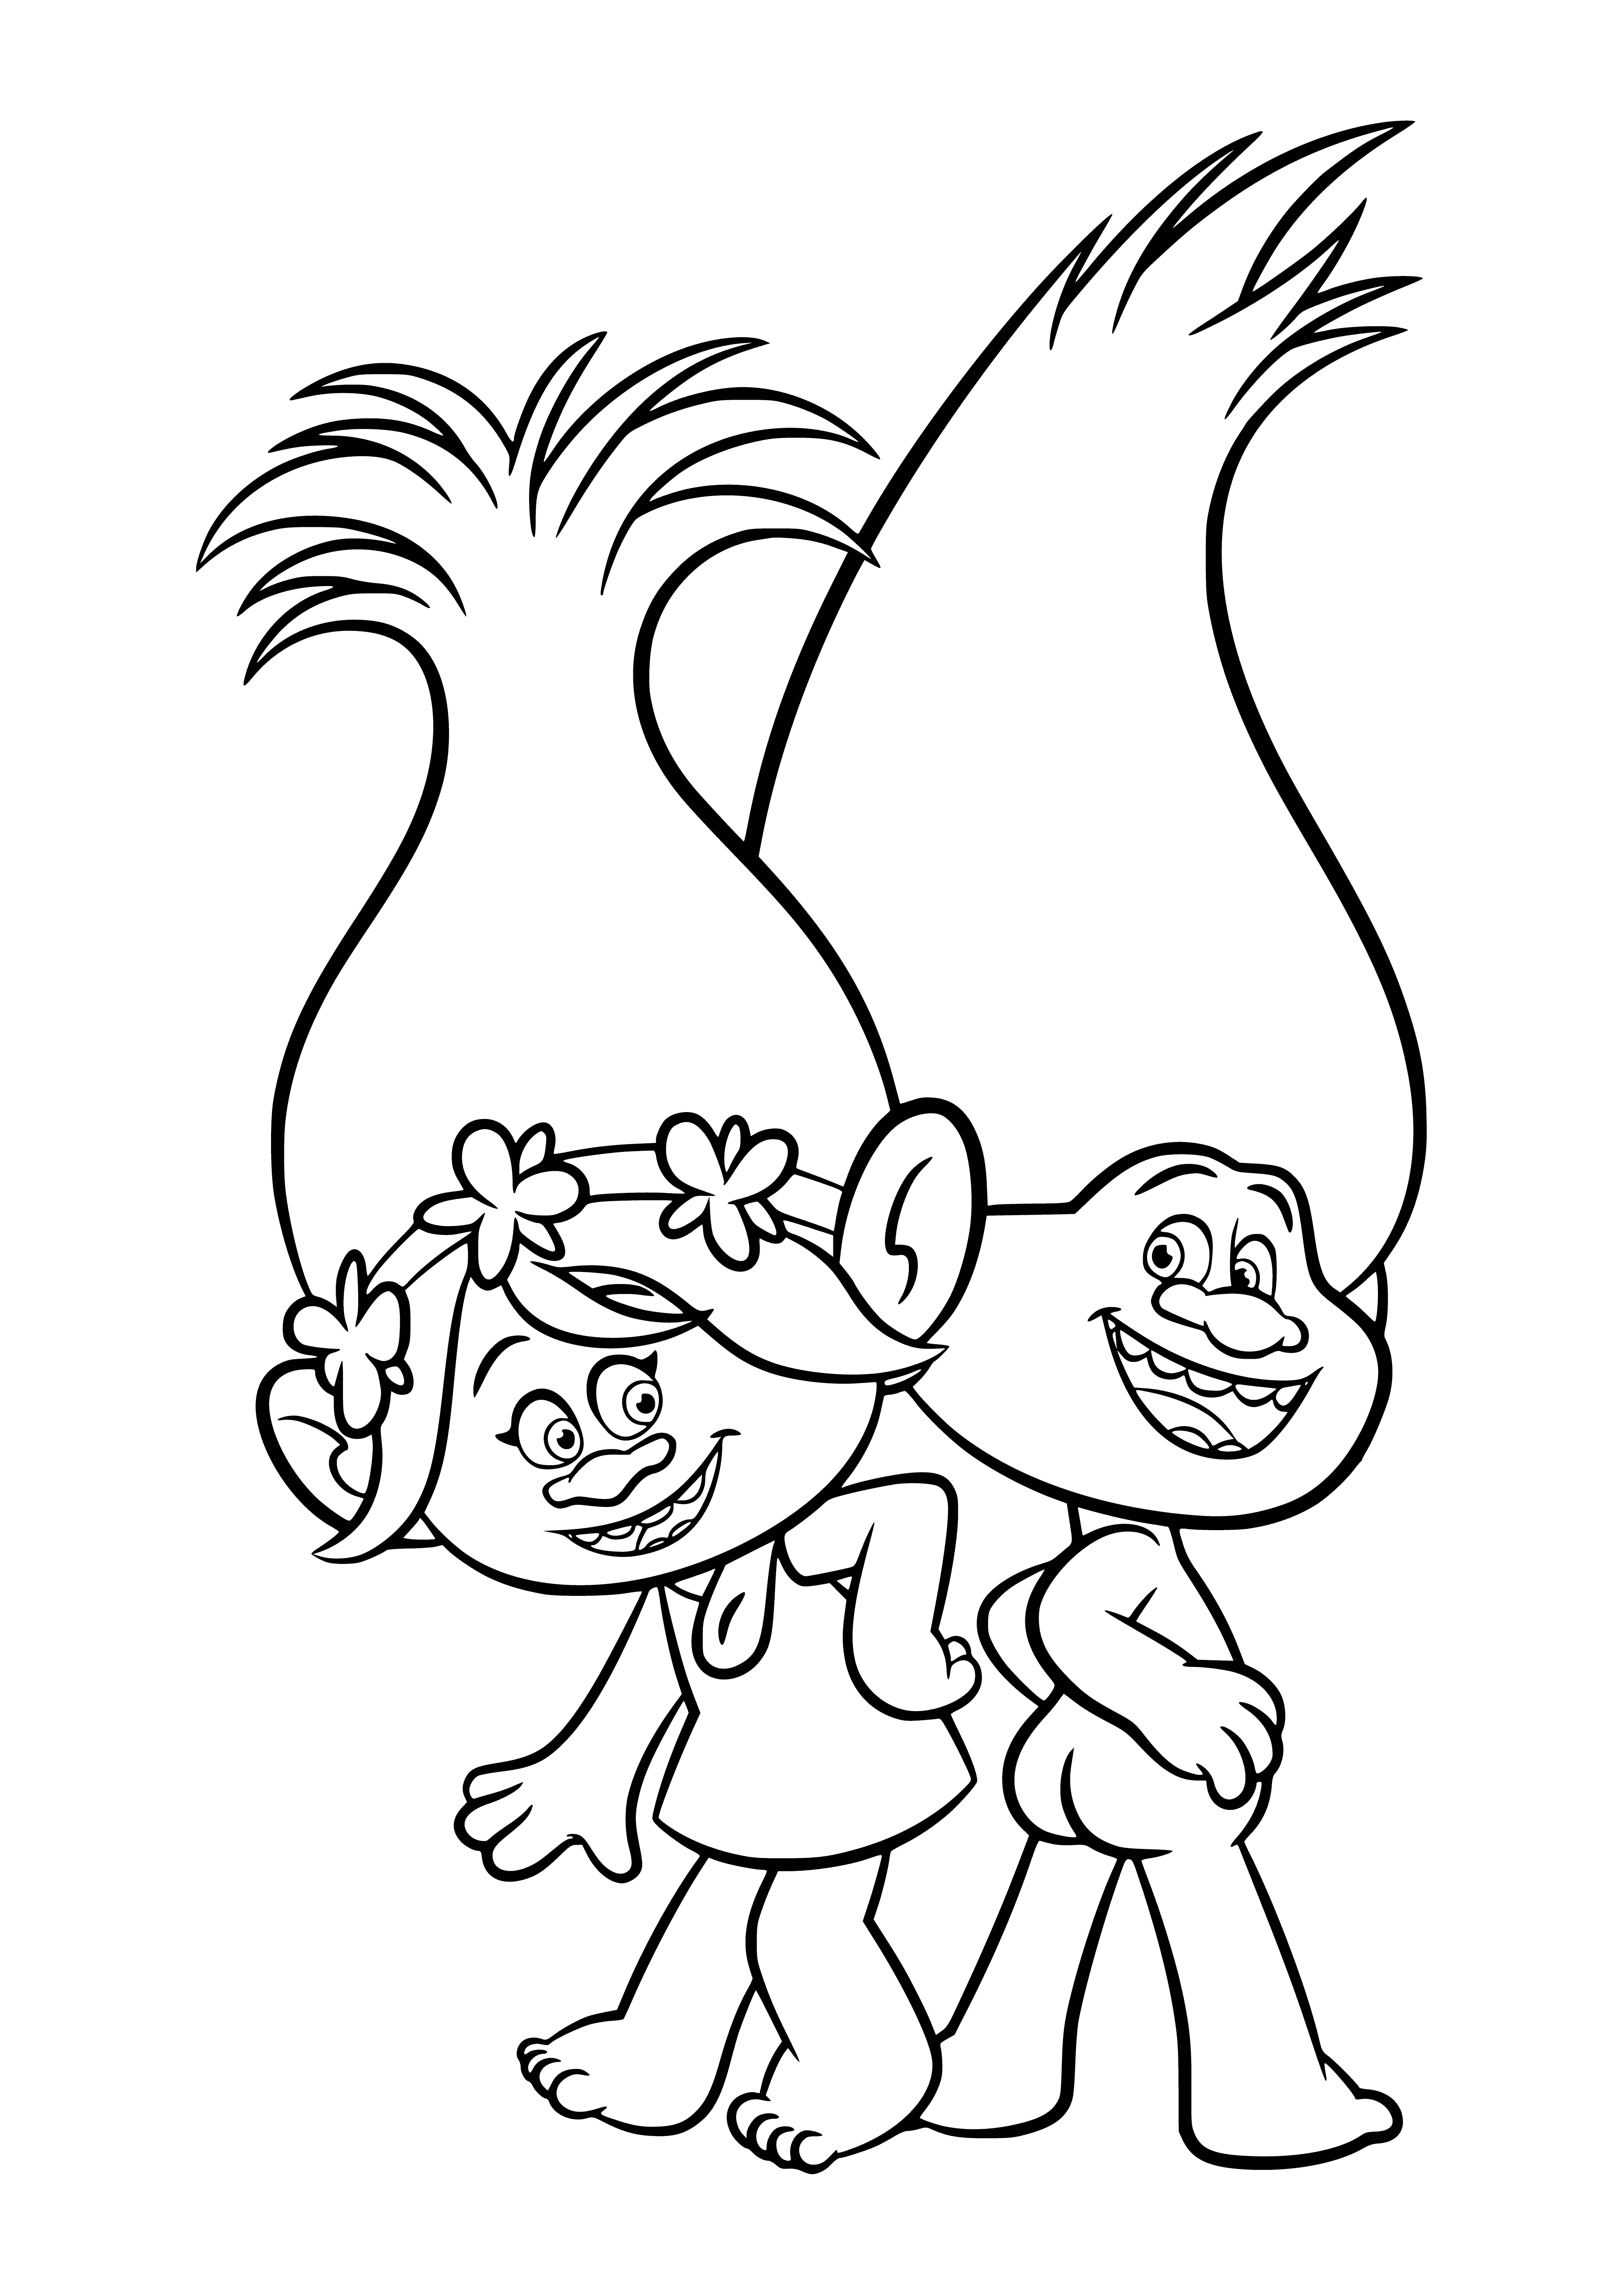 coloring page: Rosette is happy & loves to sing/dance. Diamond is smart & calm. Rosette: wavy pink hair & colorful dress. Diamond:straight white hair & glasses.